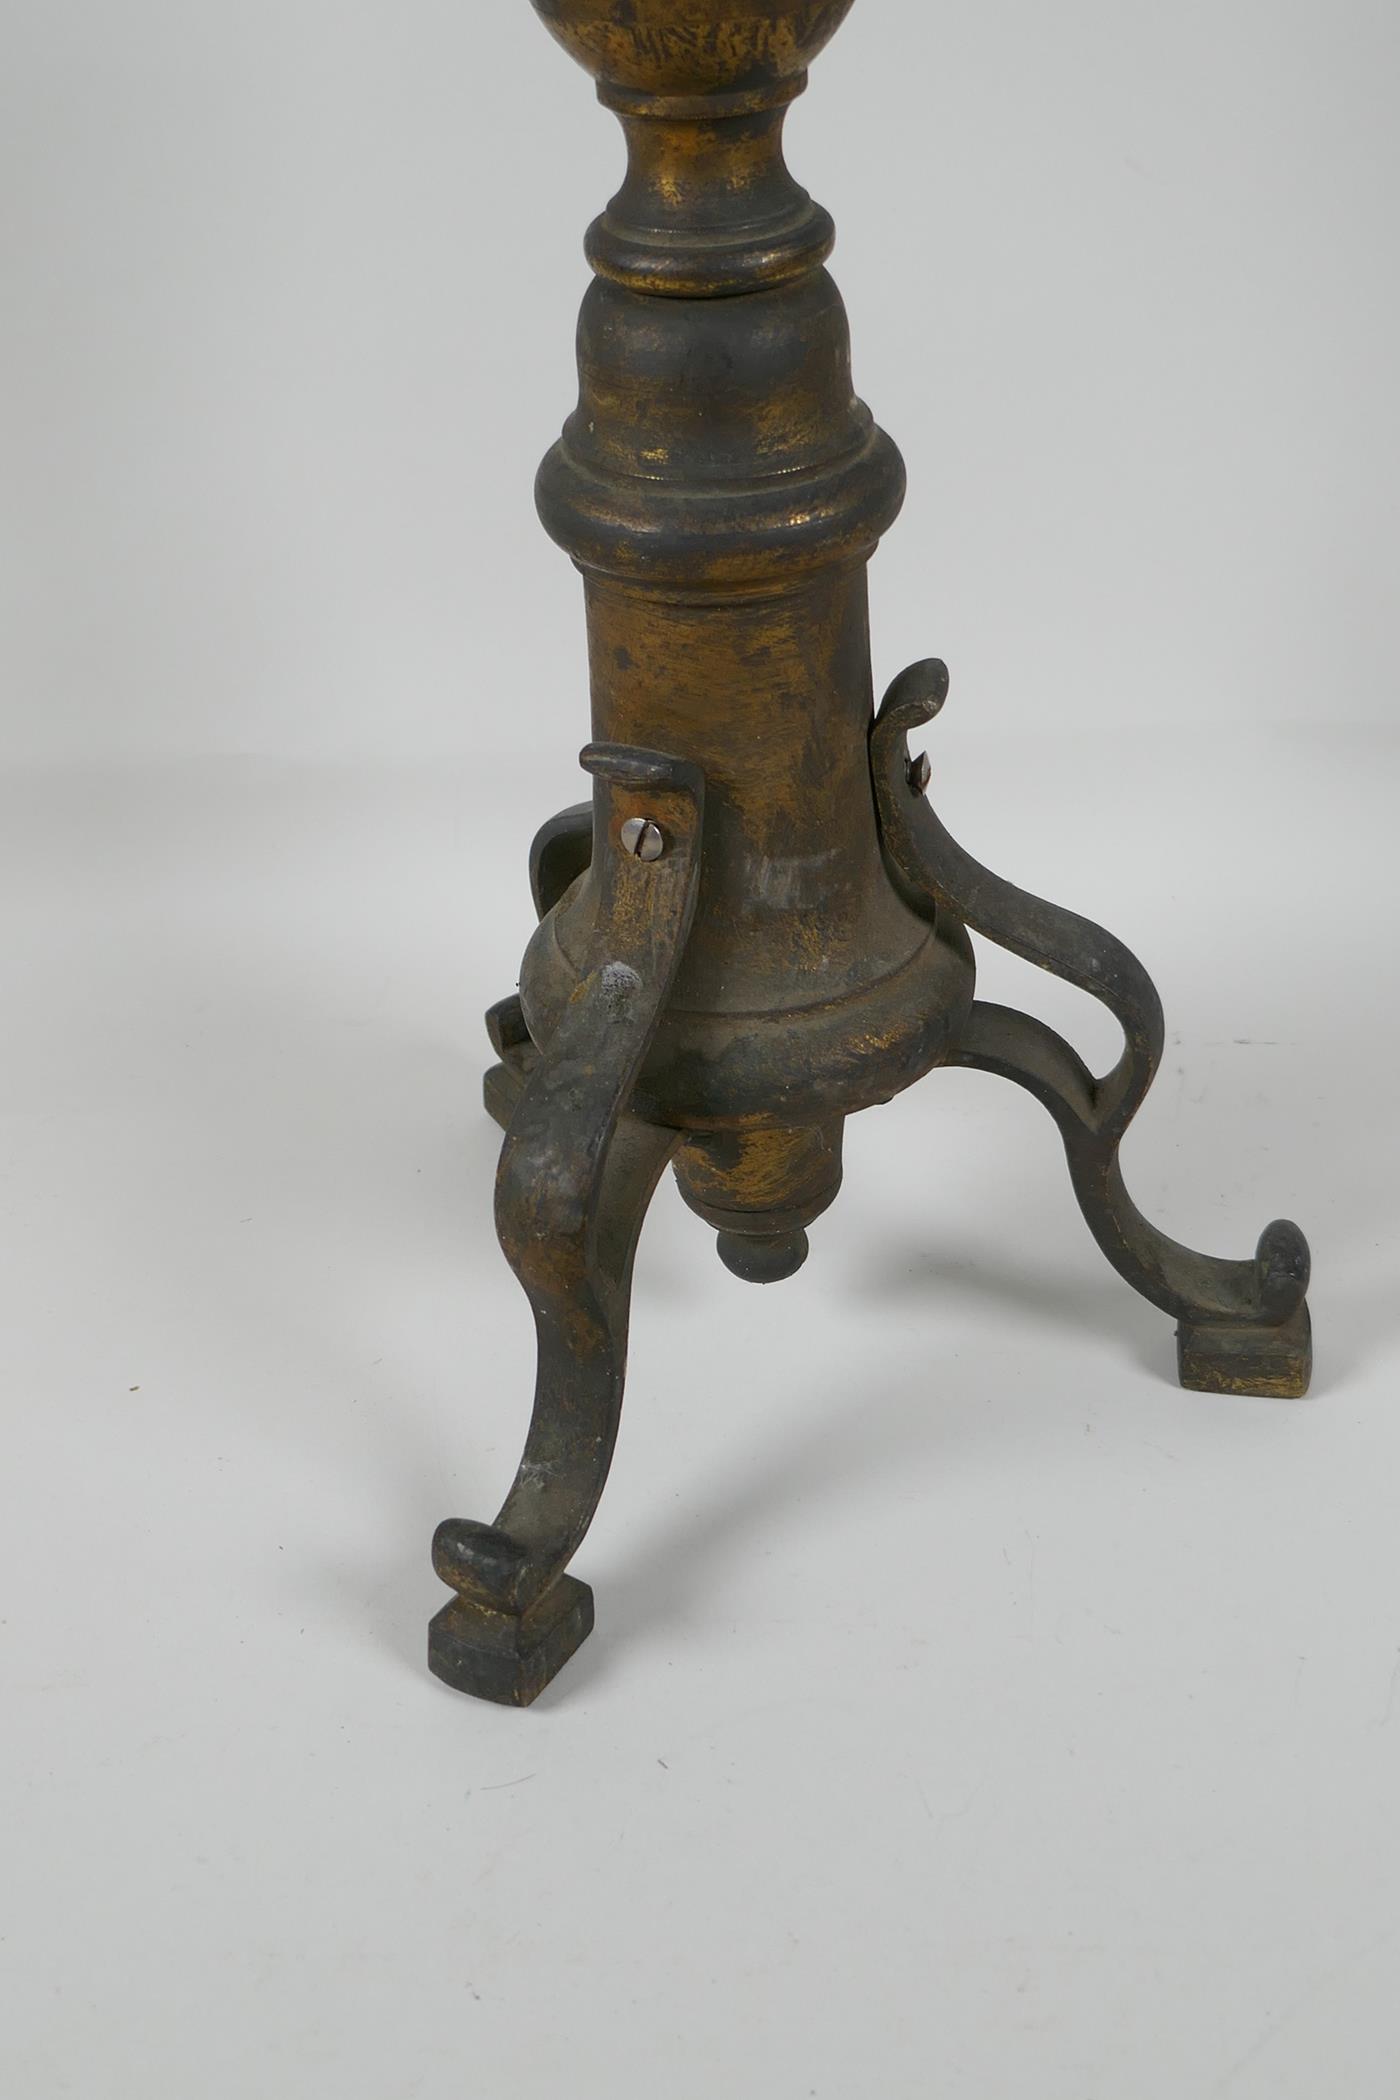 A turned bronze candlestick on a tripod base, 28" high - Image 2 of 3